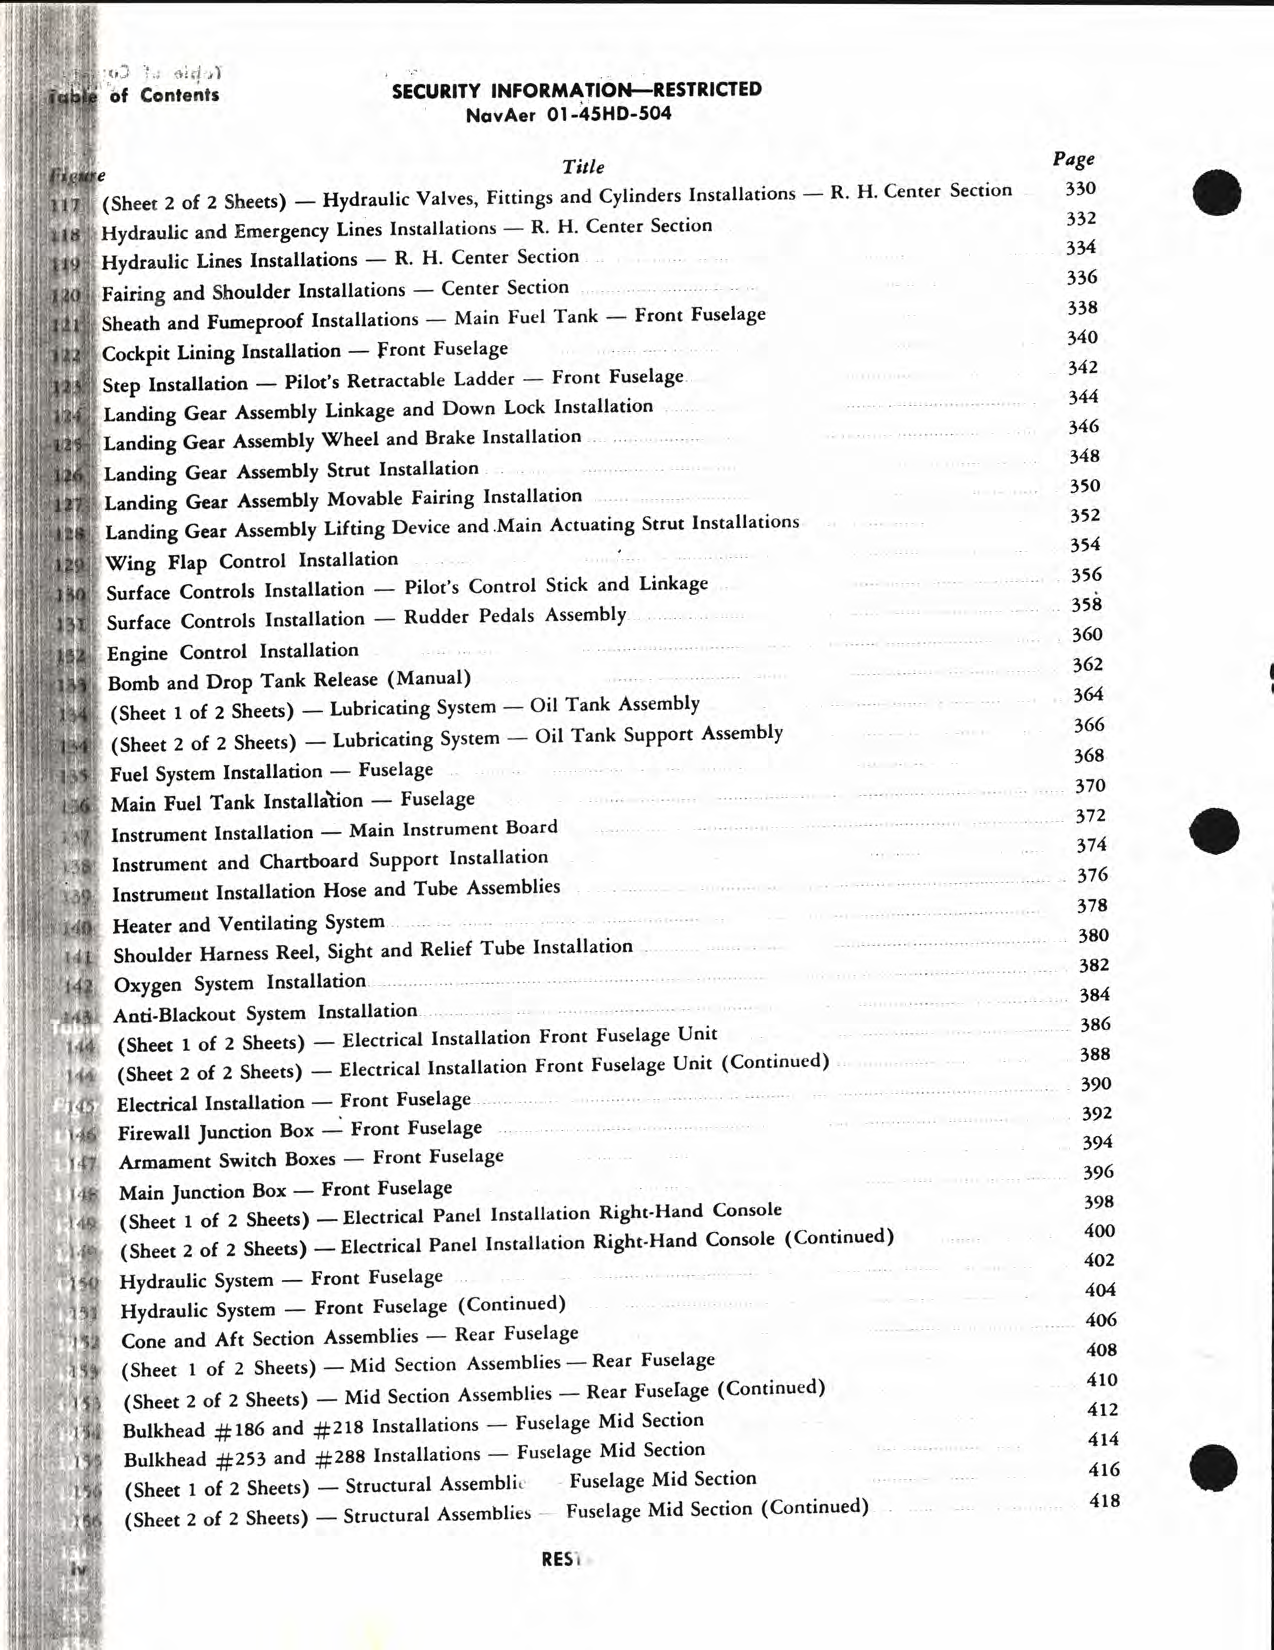 Sample page 6 from AirCorps Library document: Illustrated Maintenance Parts List for F4U-5, -5N, -5NL and -5P Aircraft